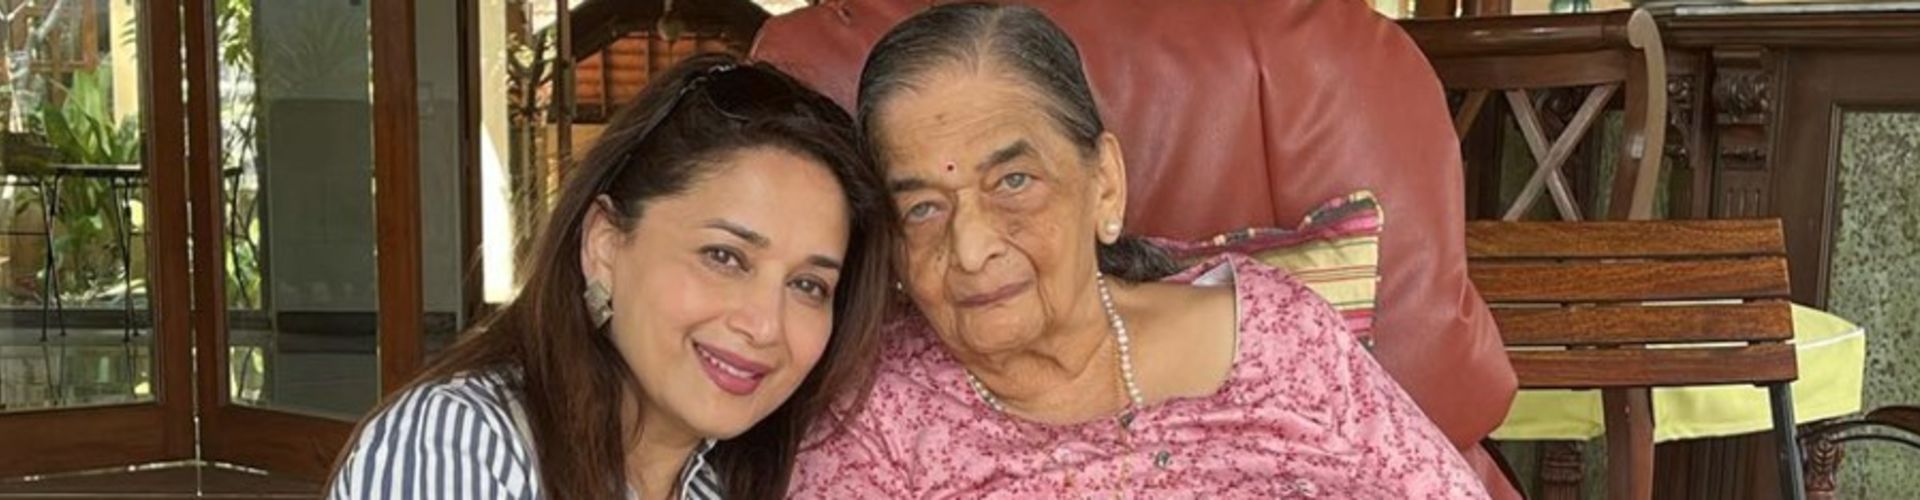 Madhur Dixit Nene Bids An Emotional Goodbye To Her Mother